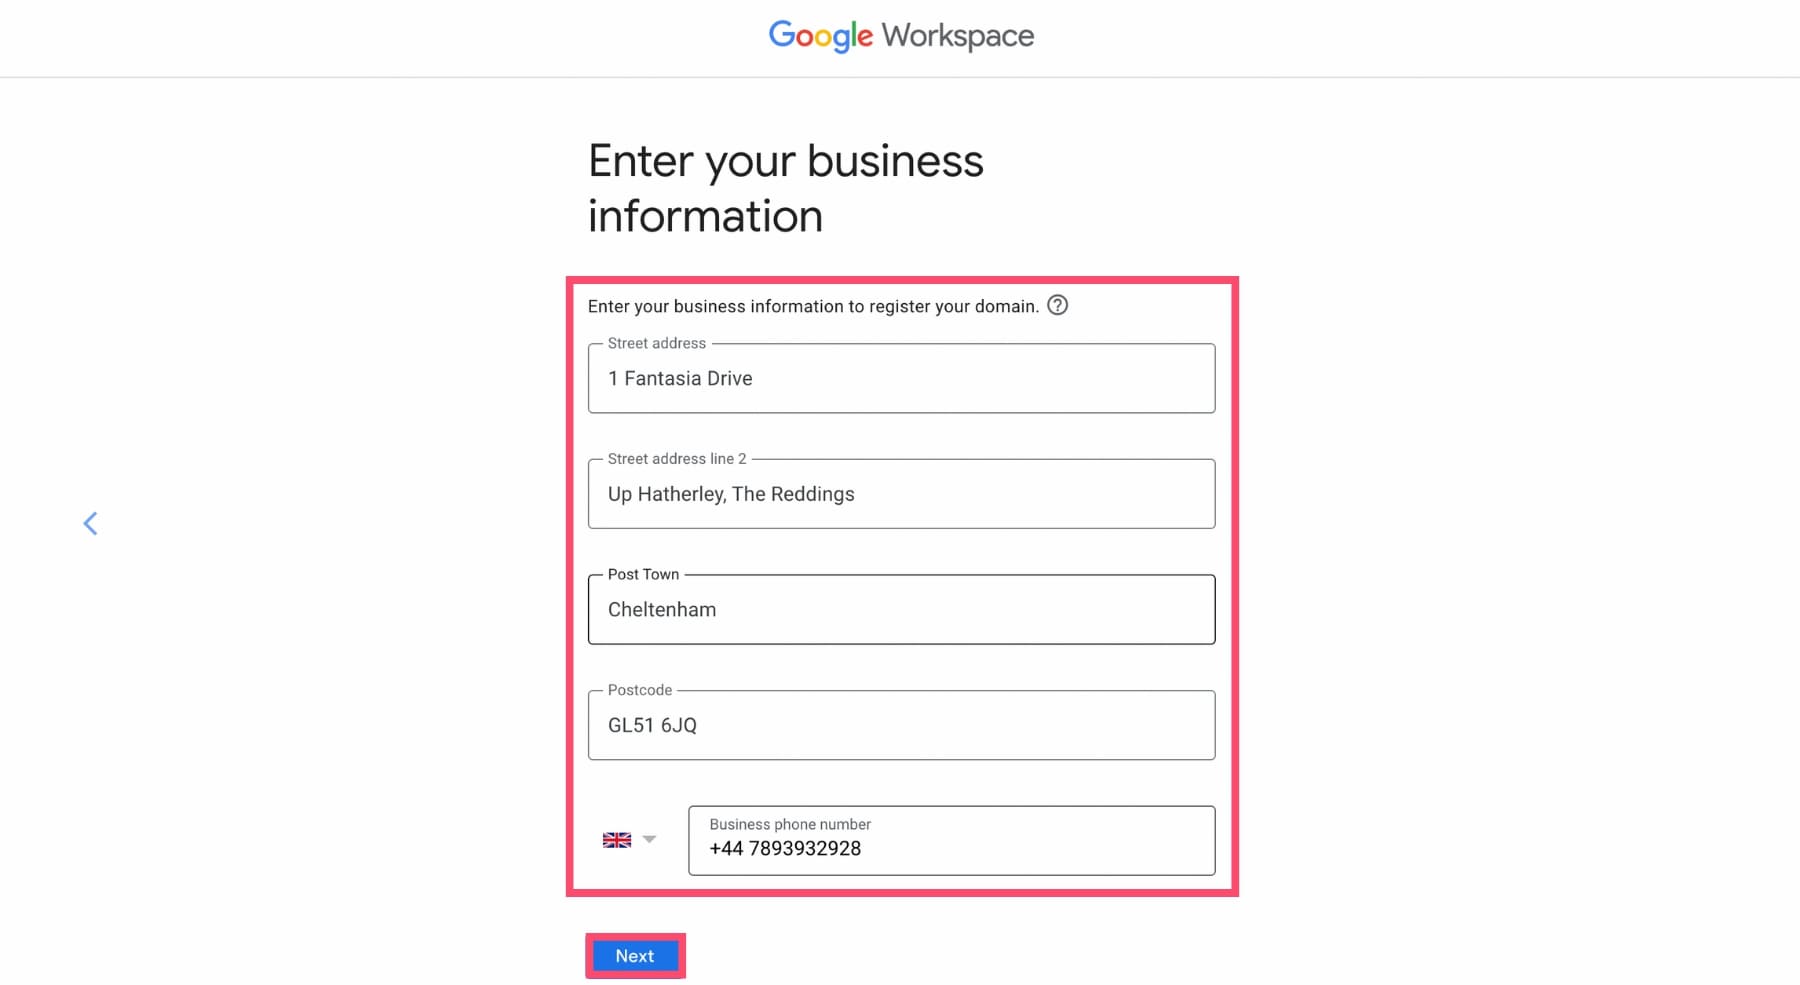 Create your Google Workspace account